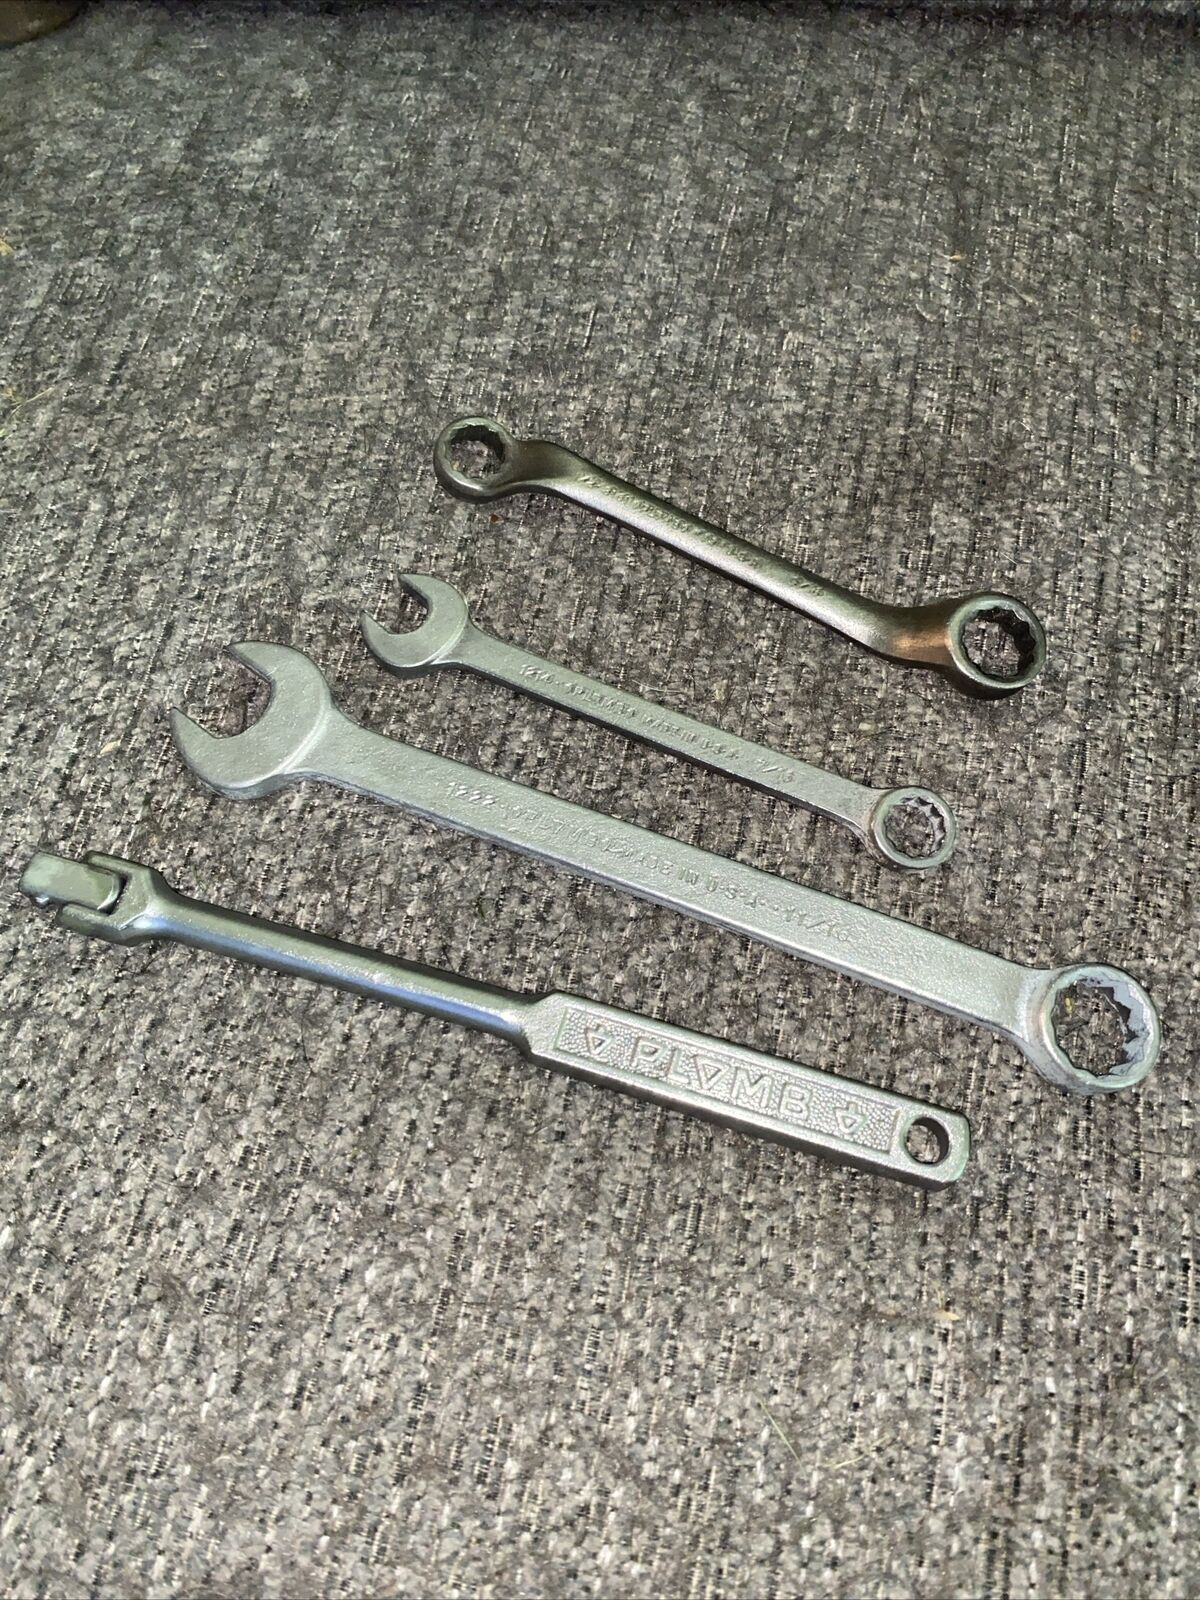 Lot Of 3 Vintage PLUMB Wrenches N 1 Rare 8” Breaker Bar 5925 Made In USA Clean 